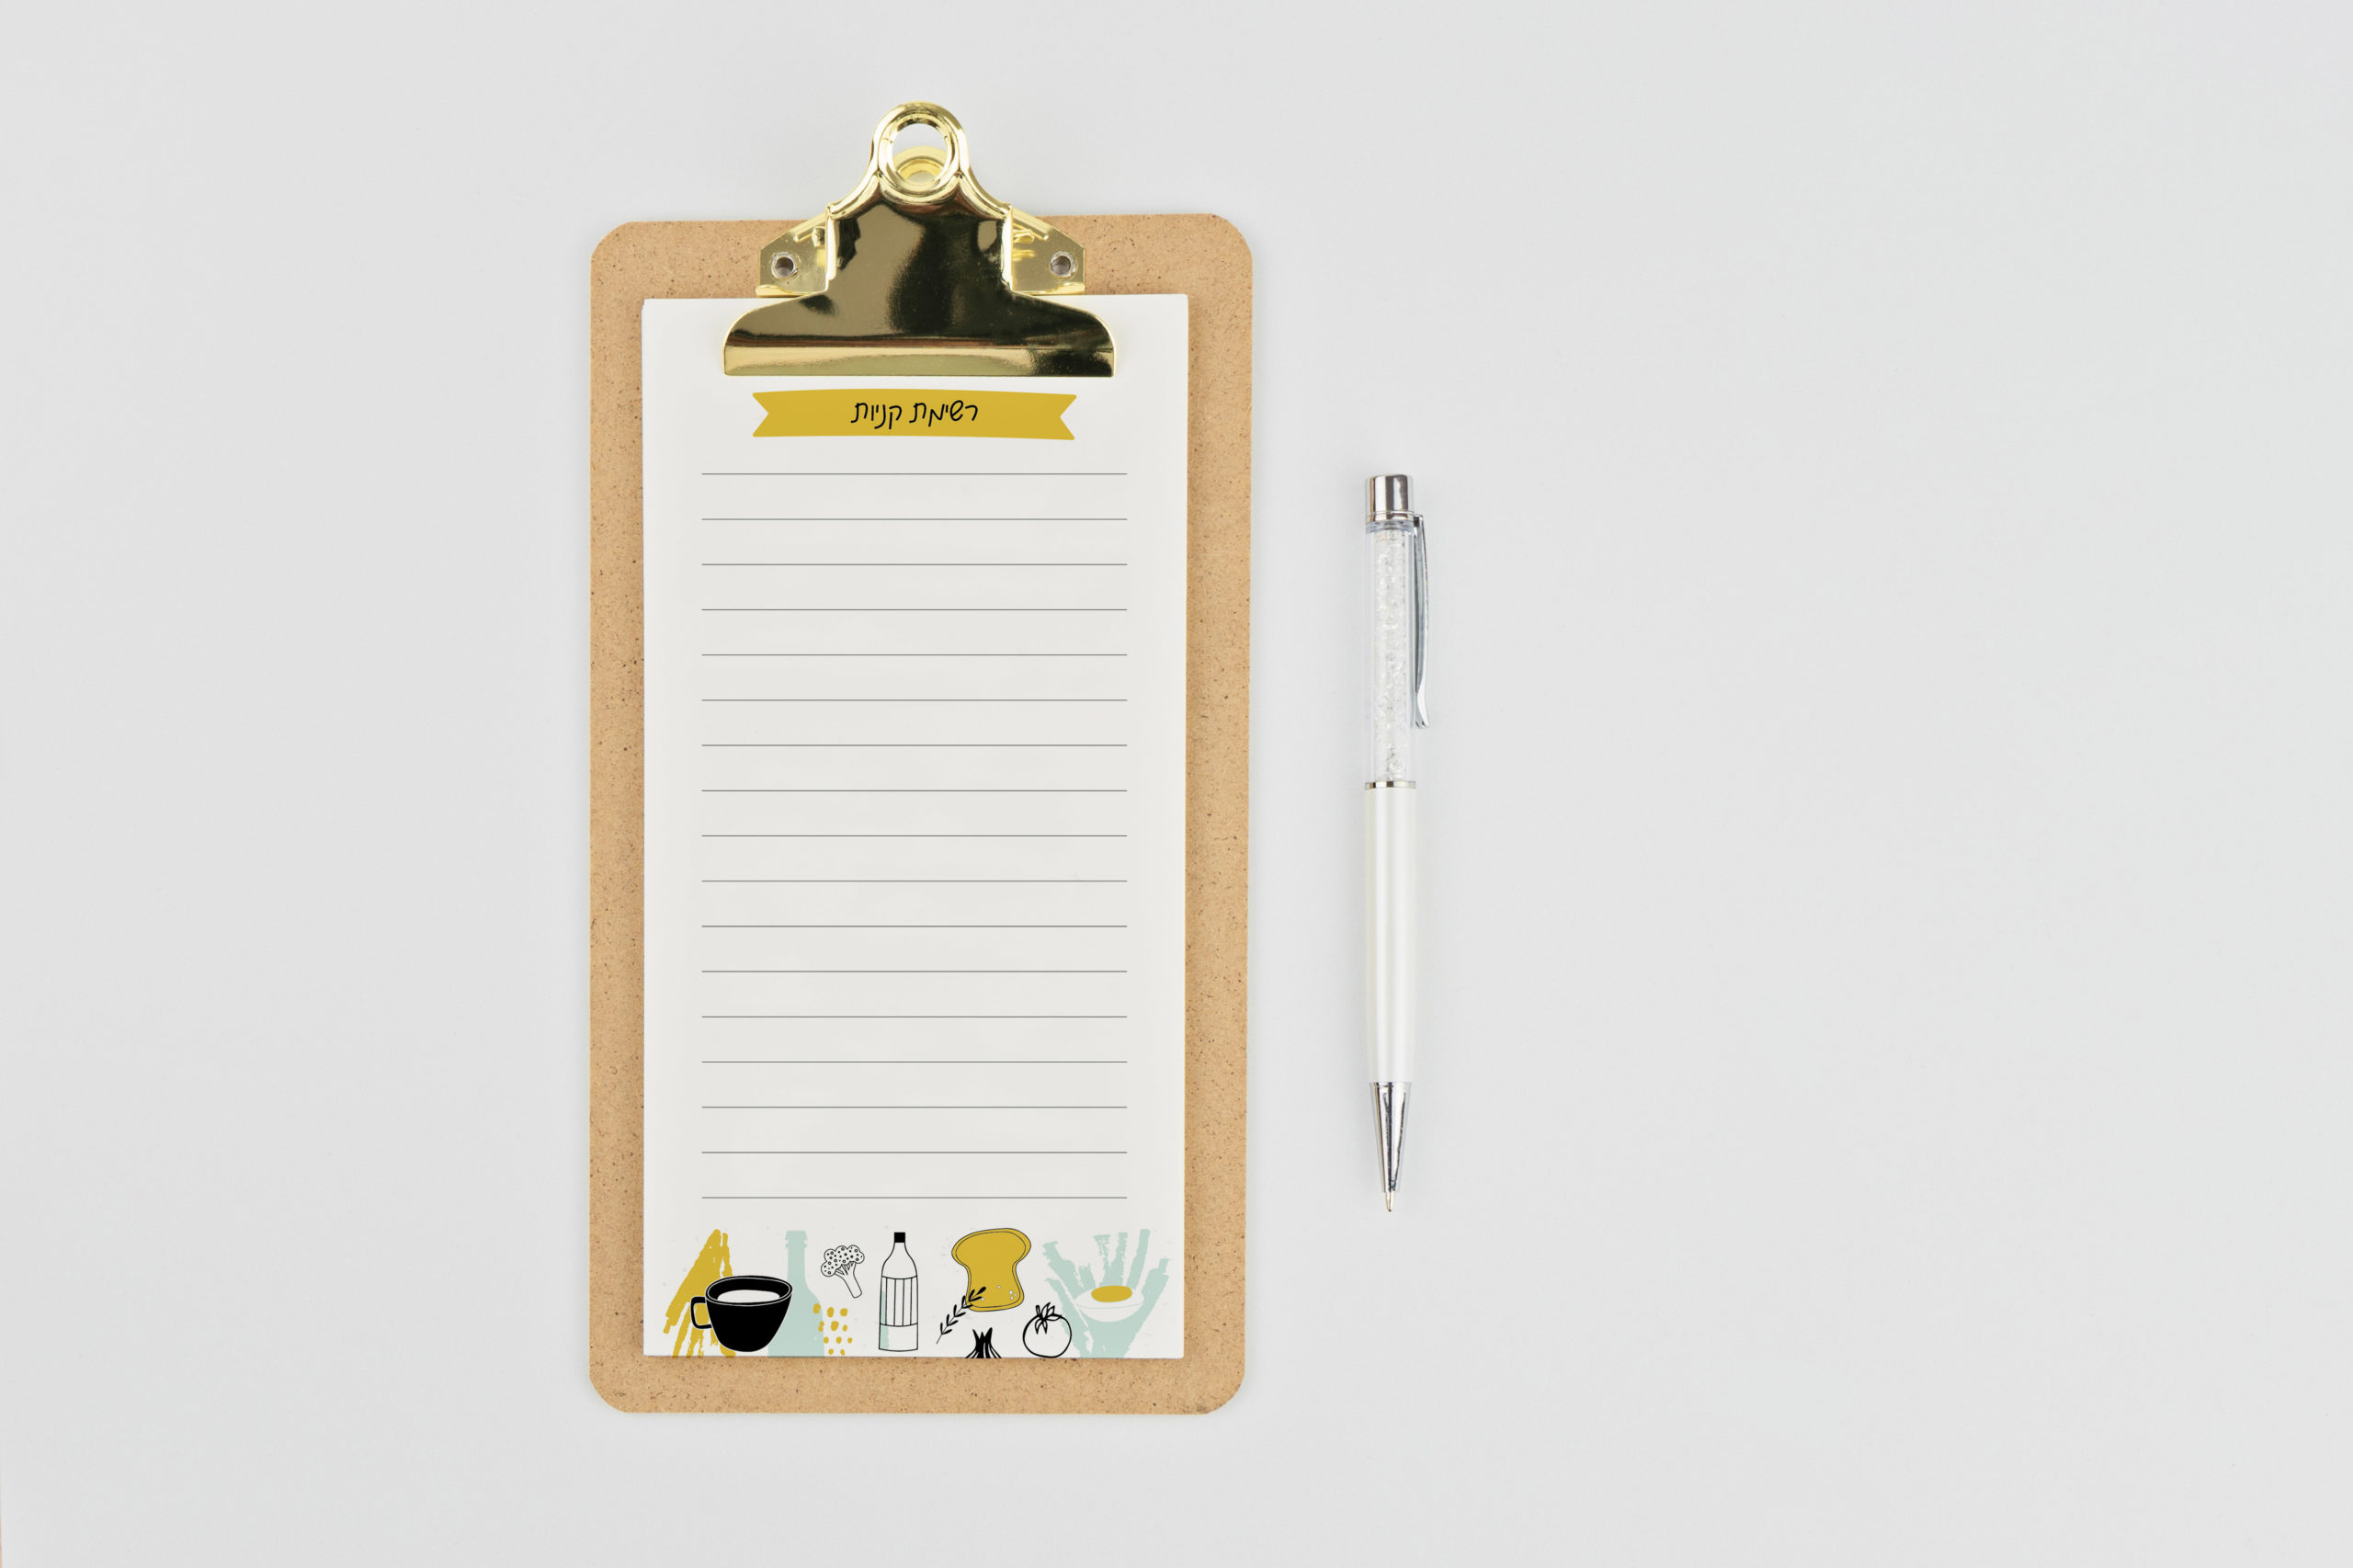 Yearly calendar 2020 clipboard notebook and pen on white background, copy space, flat lay style. New beginnings planning concept